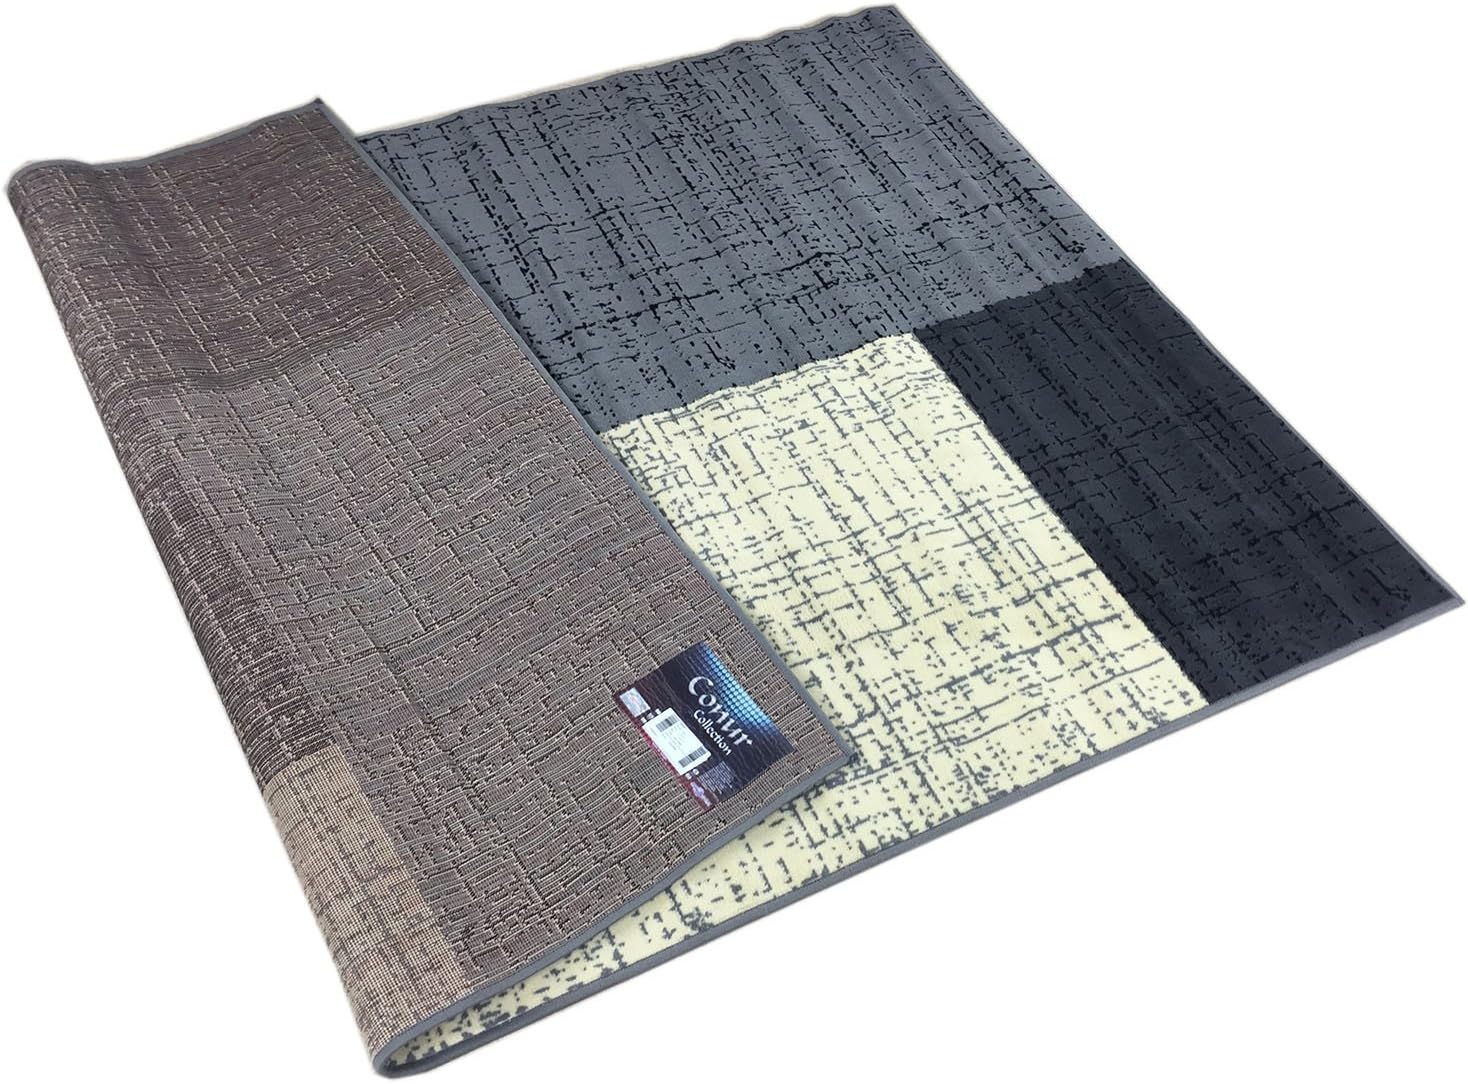 Conur Collection Squares Geometric Abstract Area Rug Rugs Modern Contemporary Area Rug 2 Color Options (Grey Black , 4'11" x 6'11")-4